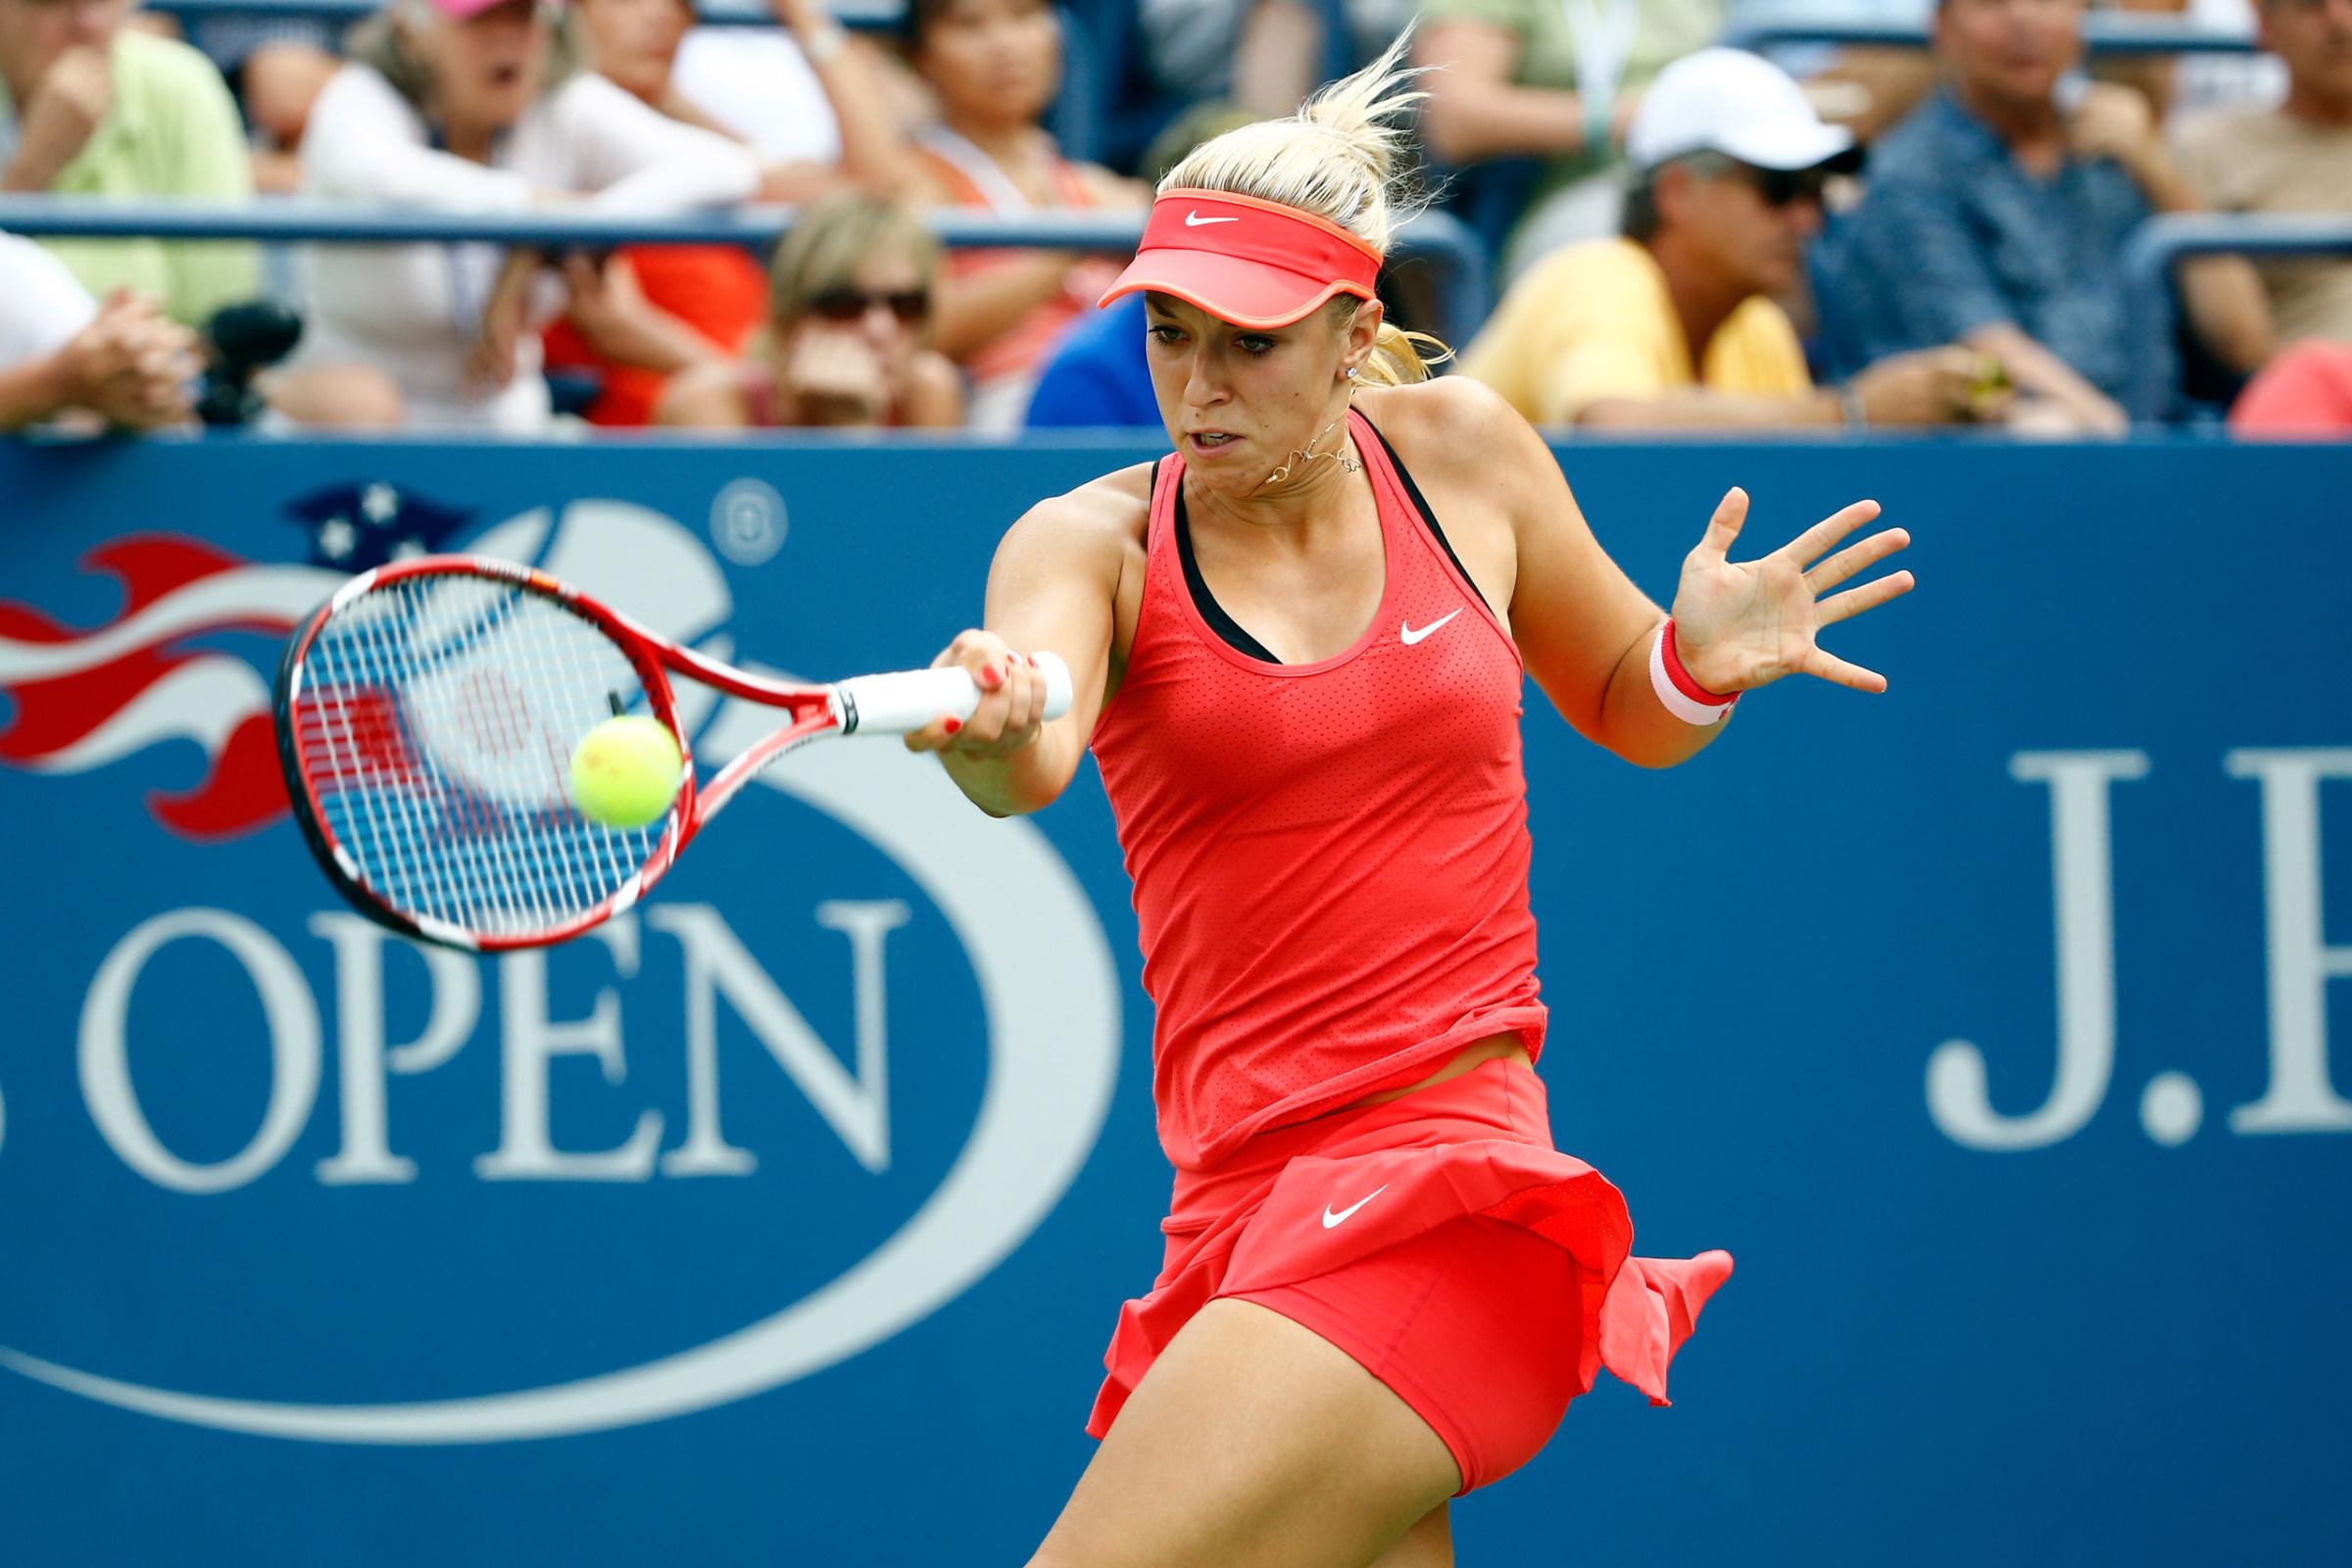 NEW YORK, NY - SEPTEMBER 03: Sabine Lisicki of Germany returns a shot against Camila Giorgi of Italy during their Women's Singles Second Round match on Day Four of the 2015 US Open at the USTA Billie Jean King National Tennis Center on September 3, 2015 in the Flushing neighborhood of the Queens borough of New York City. (Photo by Al Bello/Getty Images)